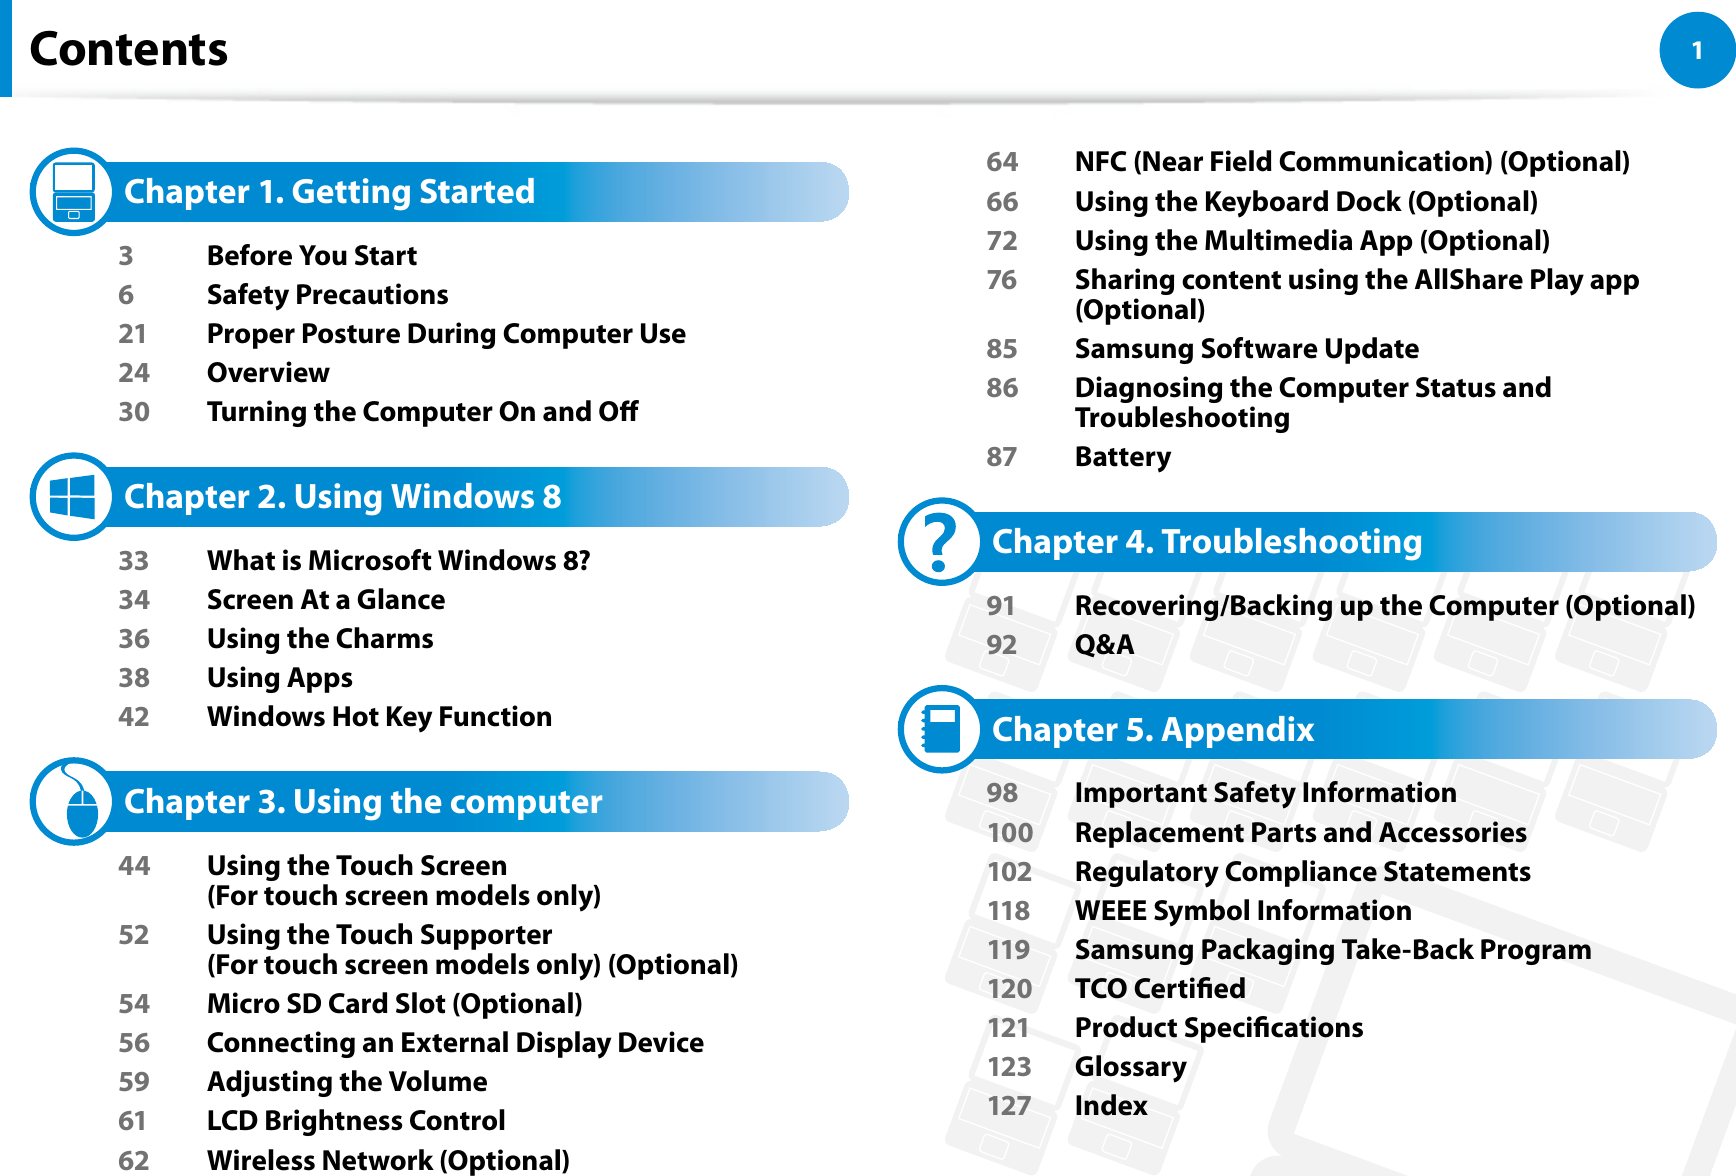 1Chapter 1 Getting StartedContents   Chapter 1. Getting Started3  Before You Start6 Safety Precautions21  Proper Posture During Computer Use24 Overview30  Turning the Computer On and O   Chapter 2. Using Windows 8 33  What is Microsoft Windows 8?34  Screen At a Glance36  Using the Charms38 Using Apps42  Windows Hot Key Function   Chapter 3. Using the computer44  Using the Touch Screen  (For touch screen models only)52  Using the Touch Supporter  (For touch screen models only) (Optional)54  Micro SD Card Slot (Optional)56  Connecting an External Display Device59  Adjusting the Volume61  LCD Brightness Control62  Wireless Network (Optional)64  NFC (Near Field Communication) (Optional)66  Using the Keyboard Dock (Optional)72  Using the Multimedia App (Optional)76  Sharing content using the AllShare Play app (Optional)85  Samsung Software Update86  Diagnosing the Computer Status and Troubleshooting87 Battery   Chapter 4. Troubleshooting91  Recovering/Backing up the Computer (Optional)92 Q&amp;A   Chapter 5. Appendix98  Important Safety Information100  Replacement Parts and Accessories102  Regulatory Compliance Statements118  WEEE Symbol Information119  Samsung Packaging Take-Back Program120 TCO Certied121 Product Specications123 Glossary127 Index